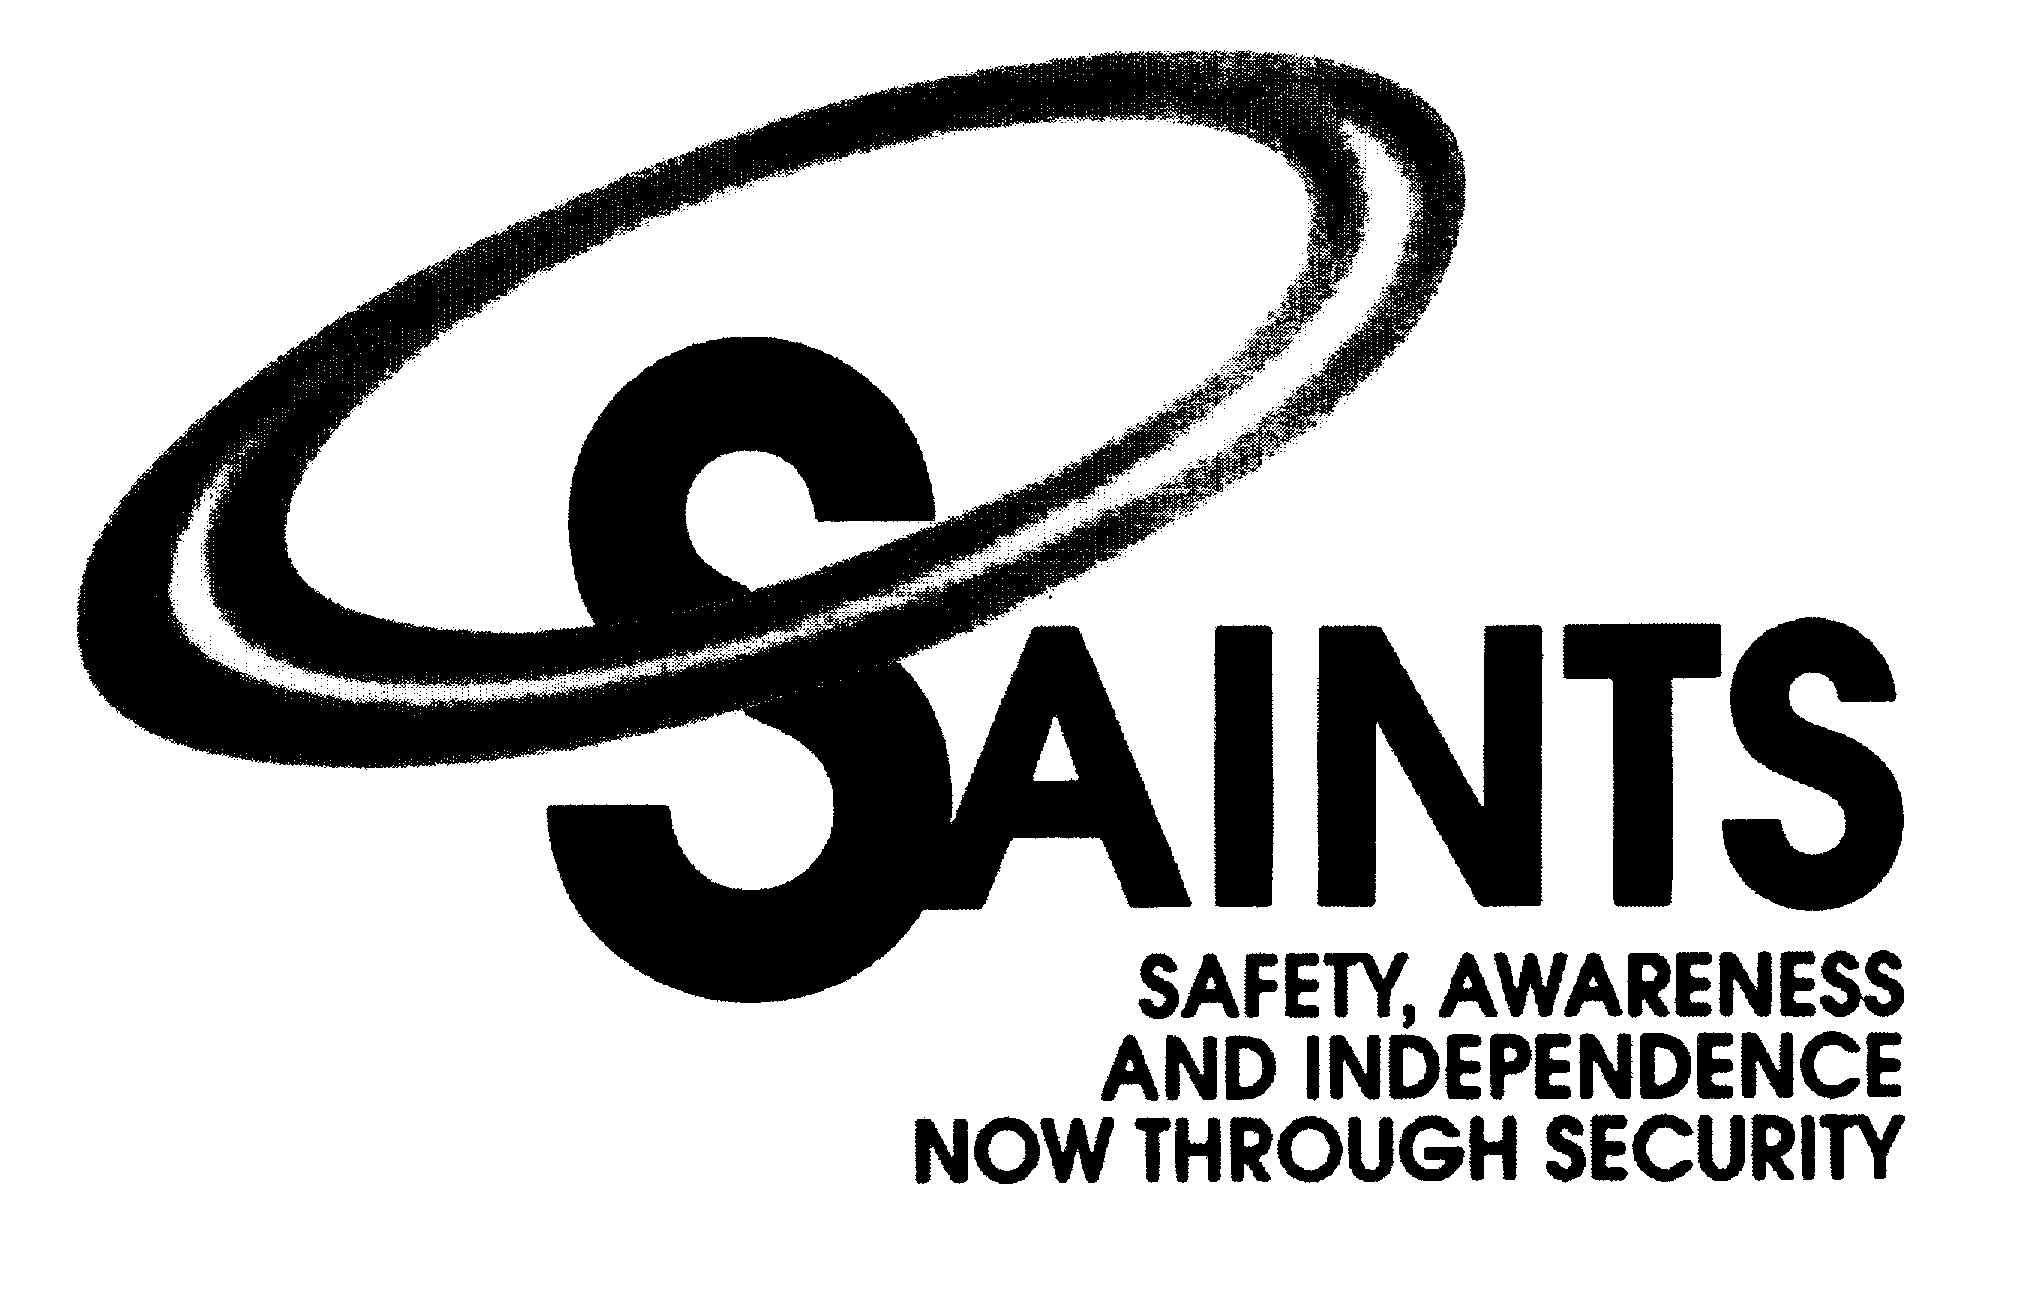  SAINTS SAFETY, AWARENESS AND INDEPENDENCE NOW THROUGH SECURITY